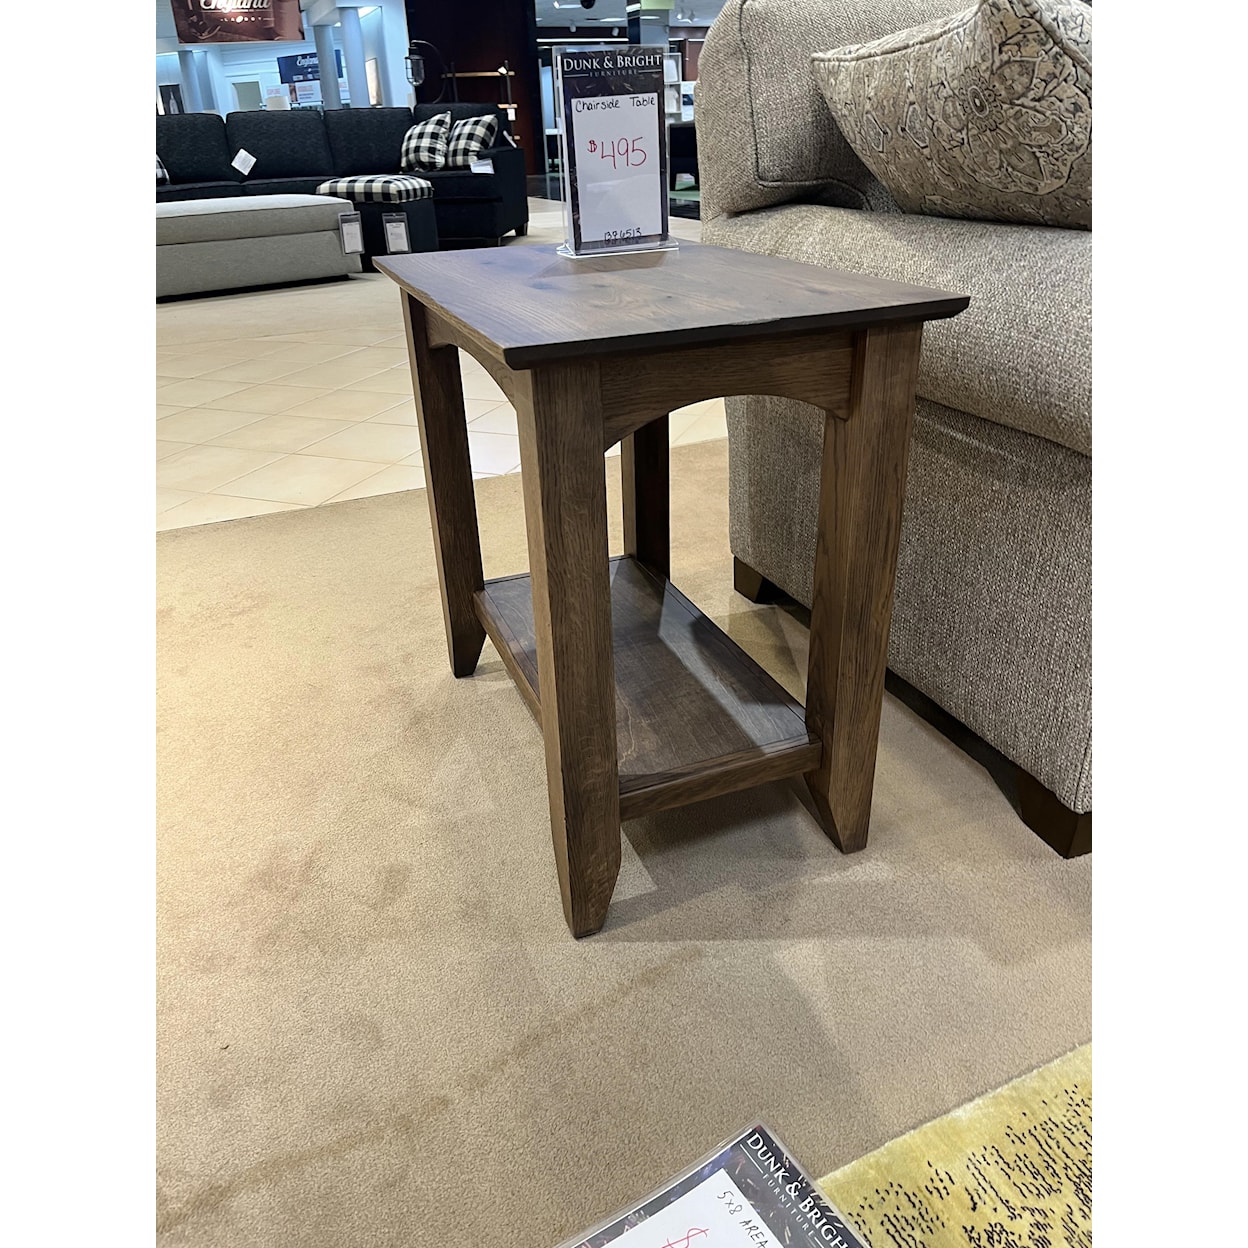 Yutzy - Urban Collection Chairside Table Chairside Table